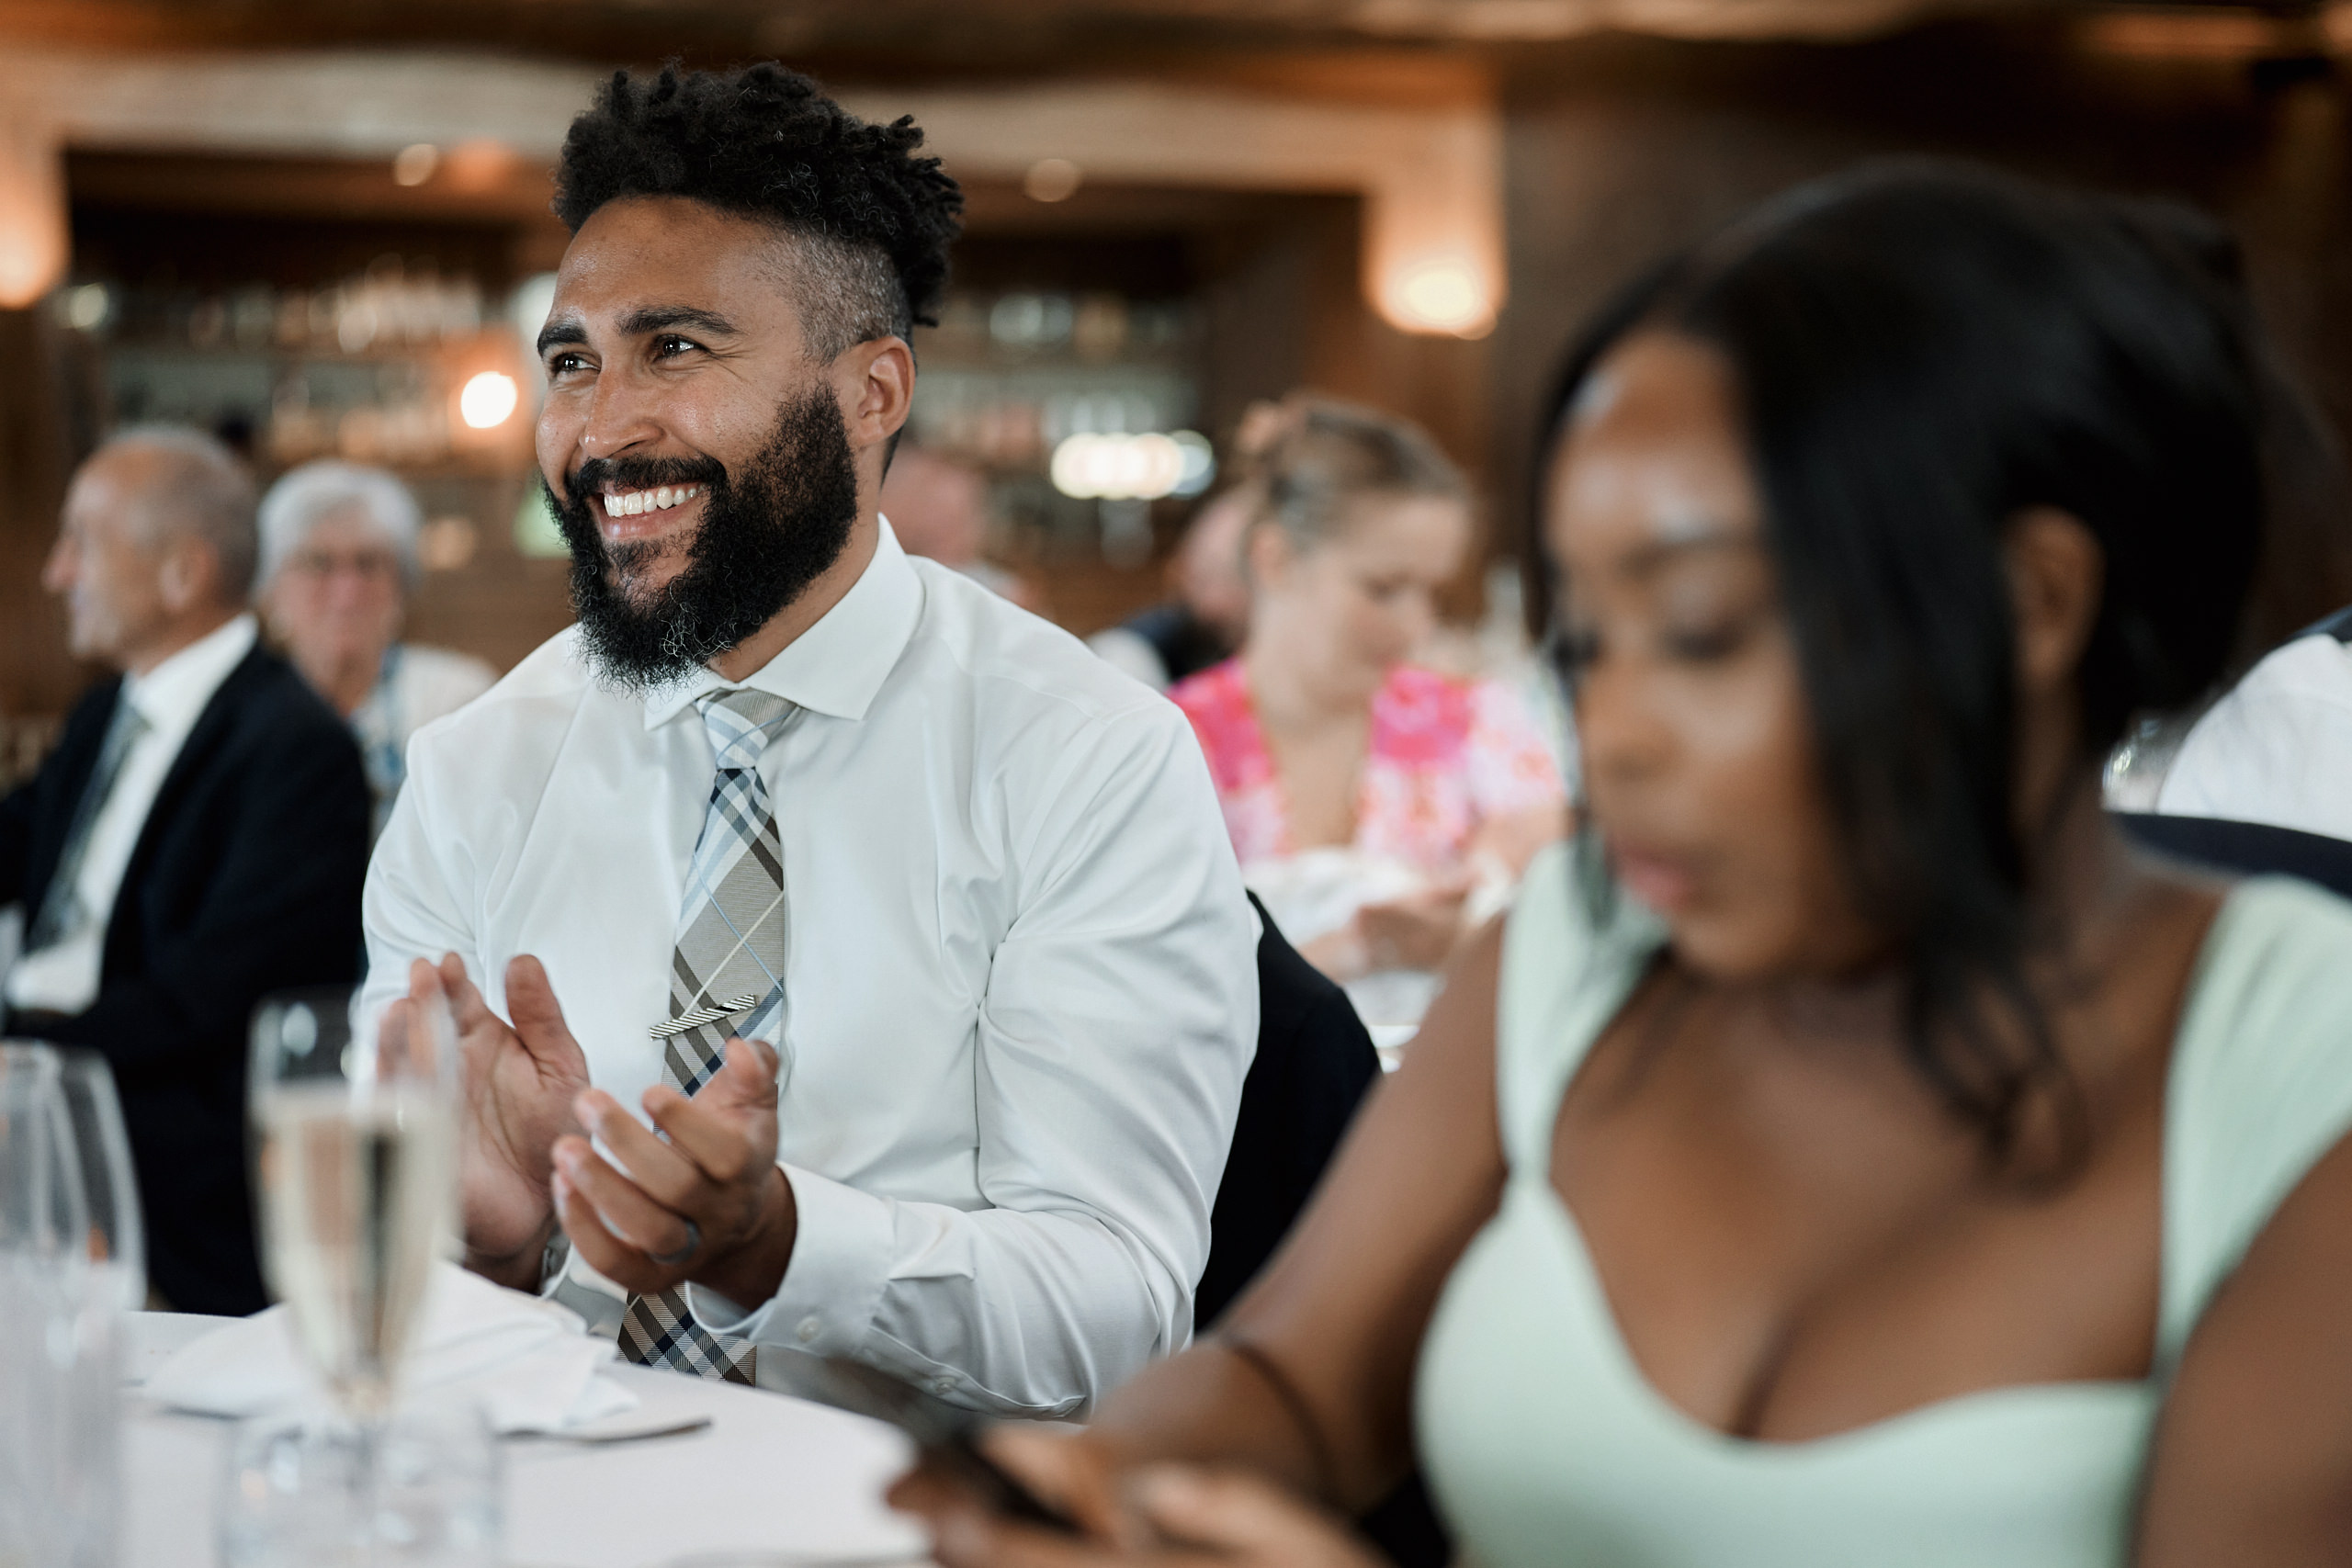 A guy and a girl applauding at a wedding party.